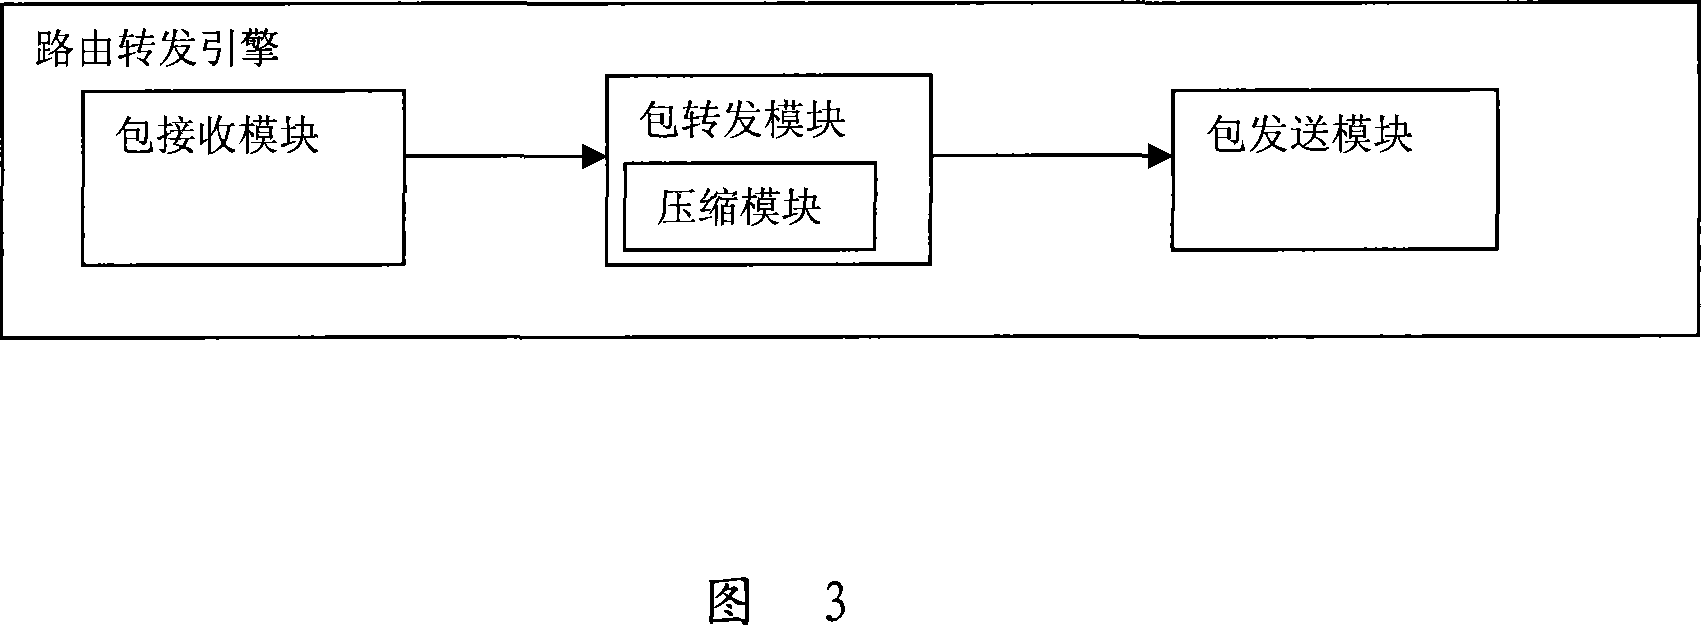 A route search method and forwarding system